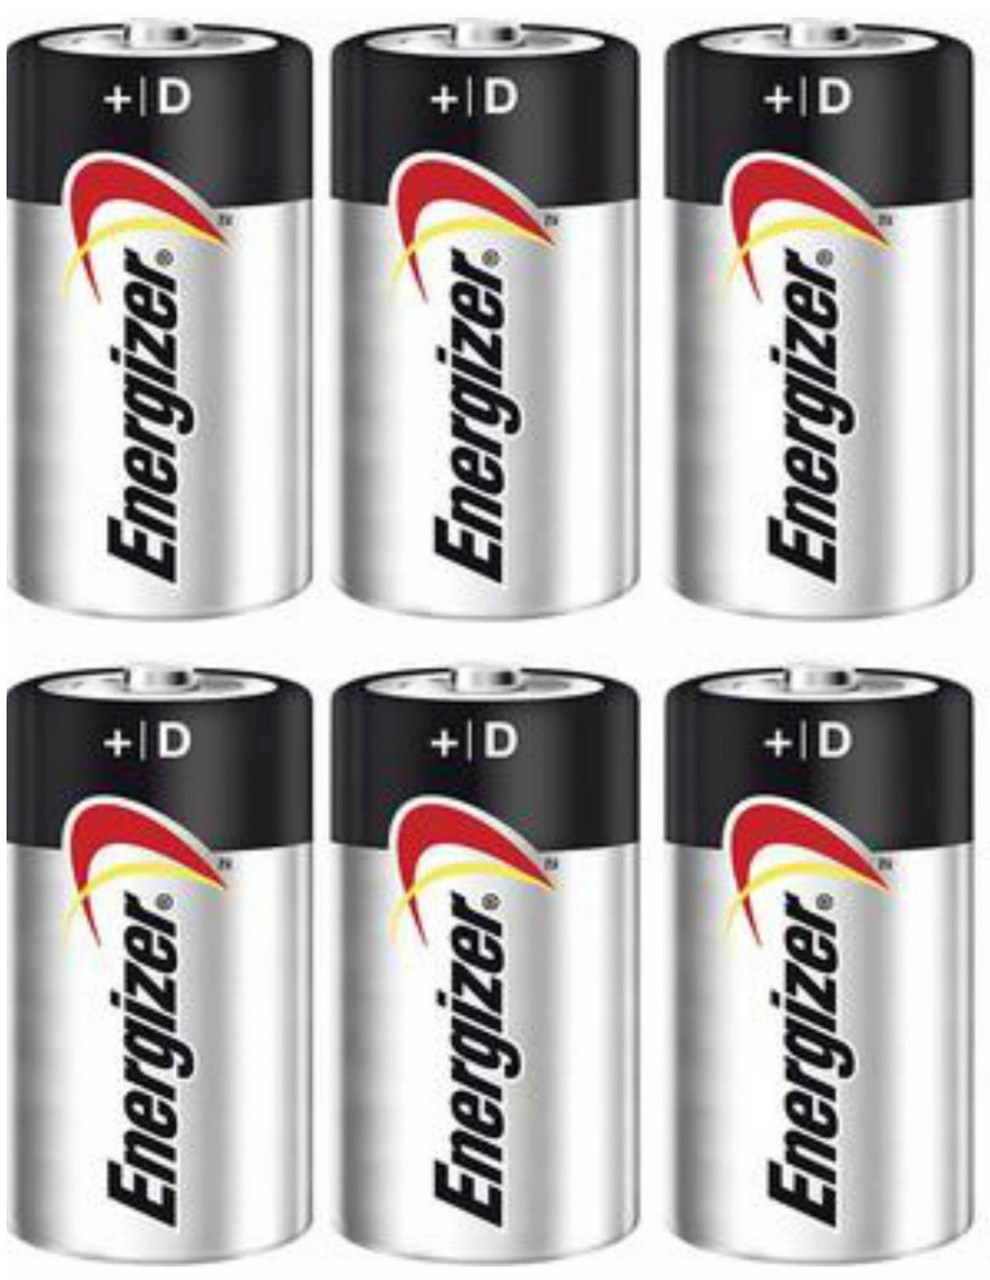 Energizer Max Alkaline D Size Batteries E95VP - 6 Pack + FREE SHIPPING!